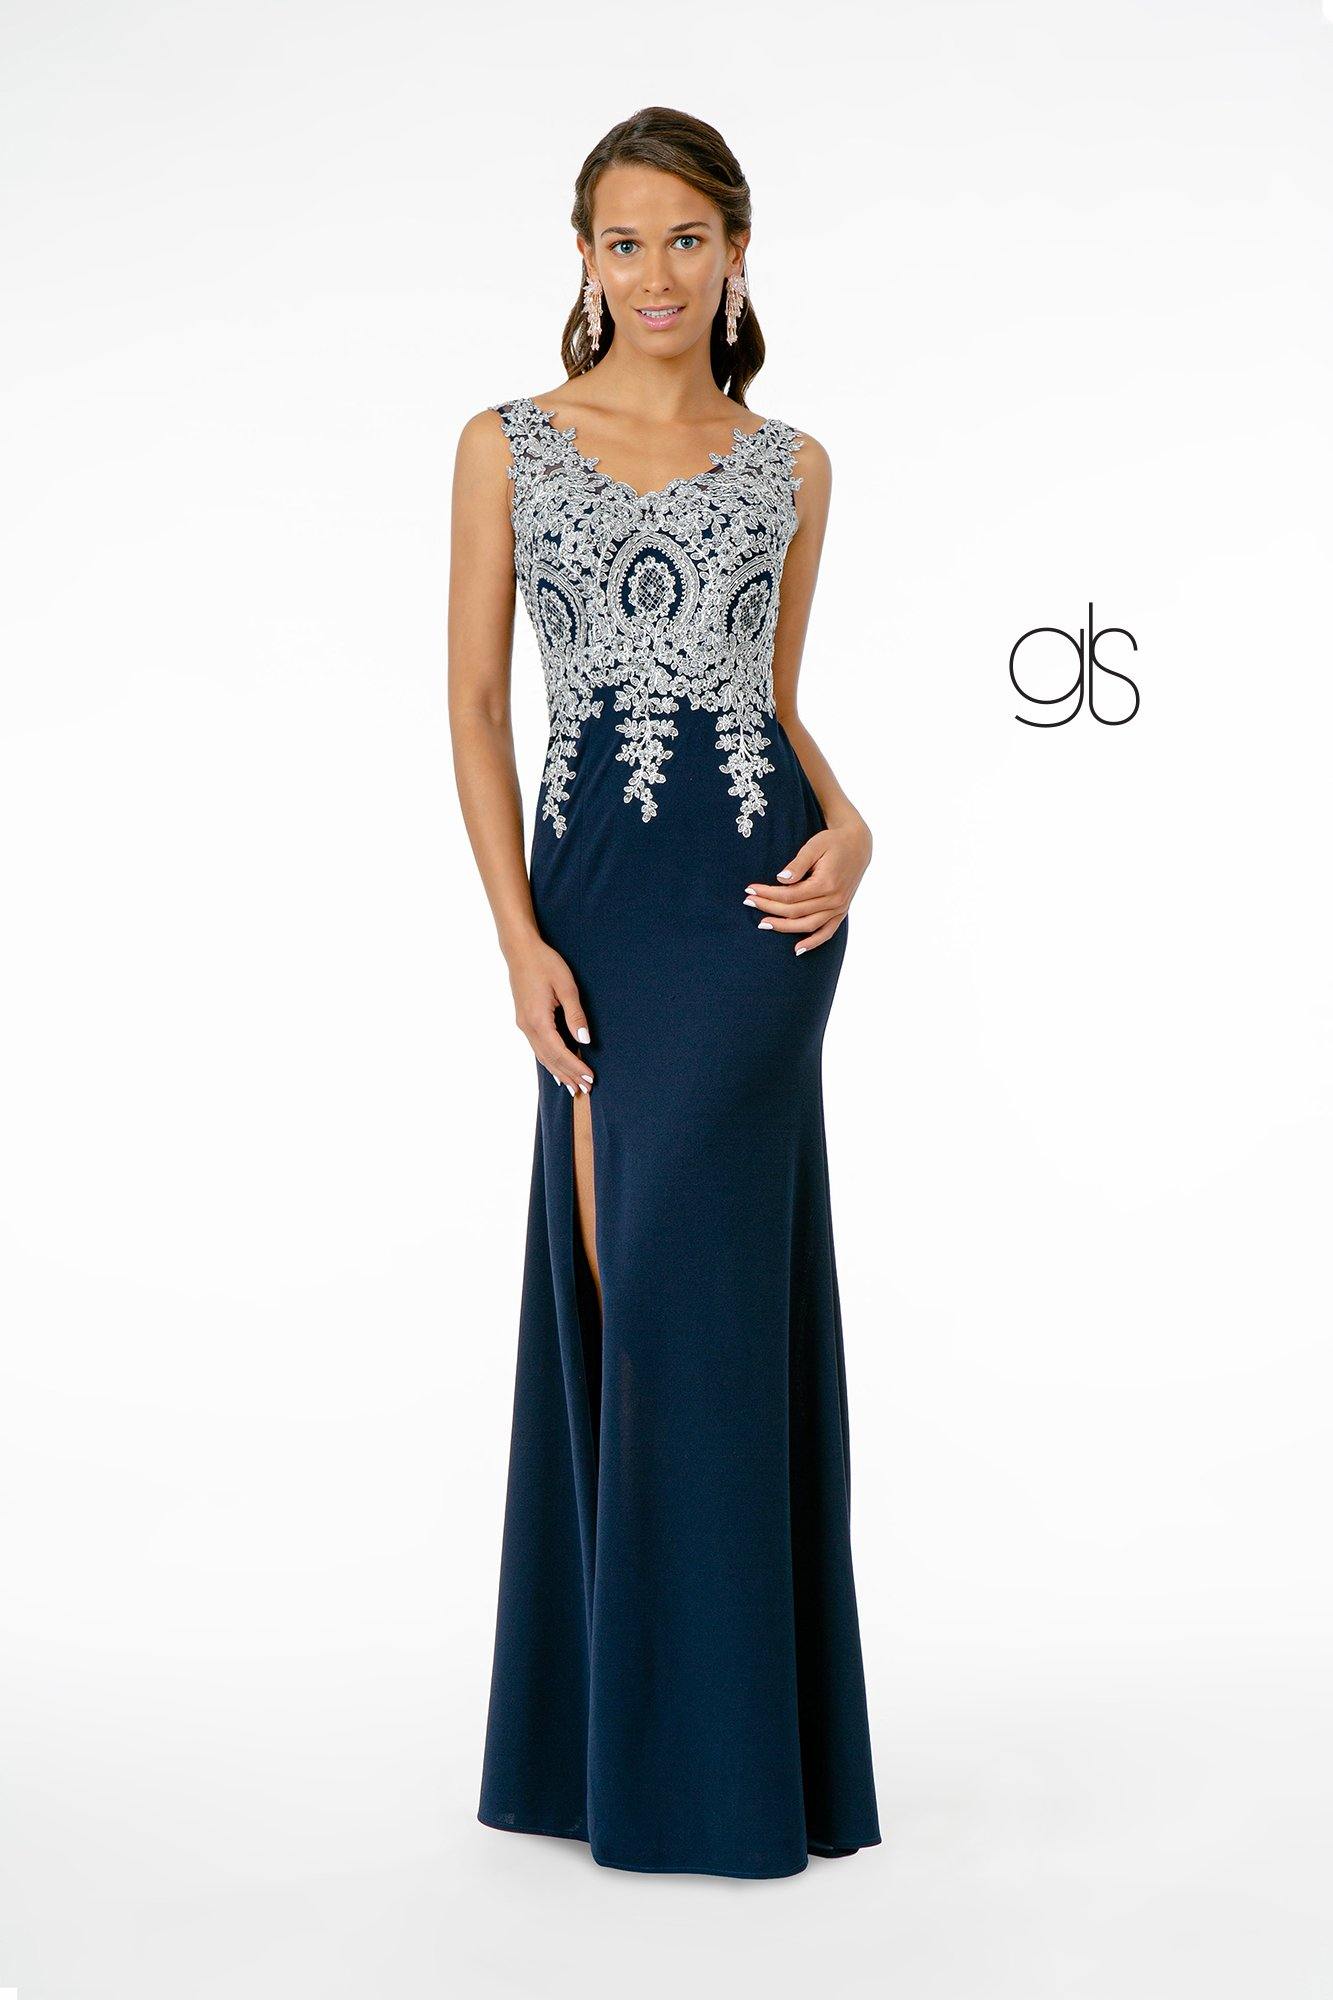 Sleeveless Long Prom Dress Sale - The Dress Outlet